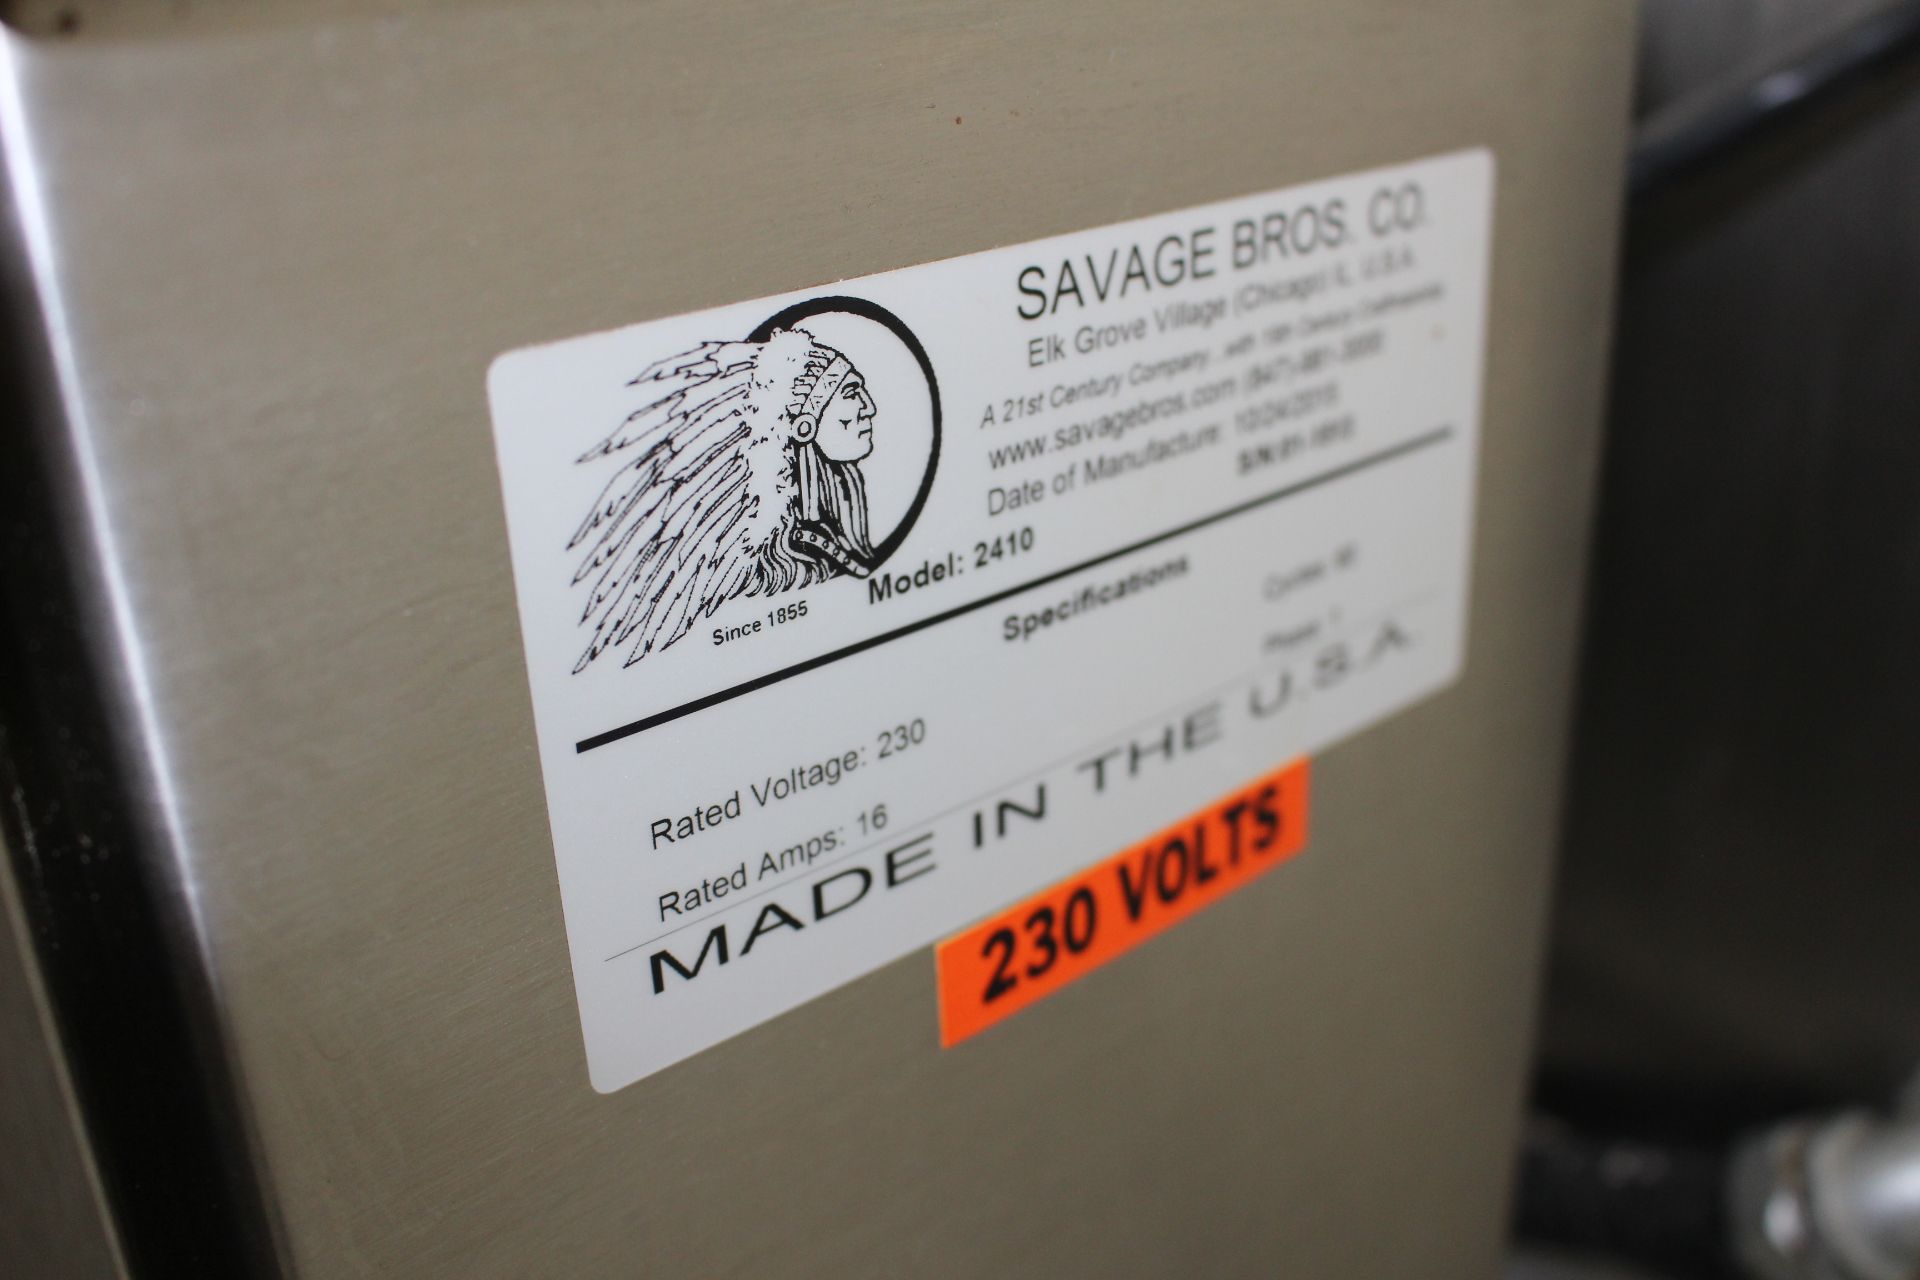 Savage model 2410 Table Top Cooker serial#011513 built 2015, single phase, 50/60 hz, 208/240 - Image 3 of 3